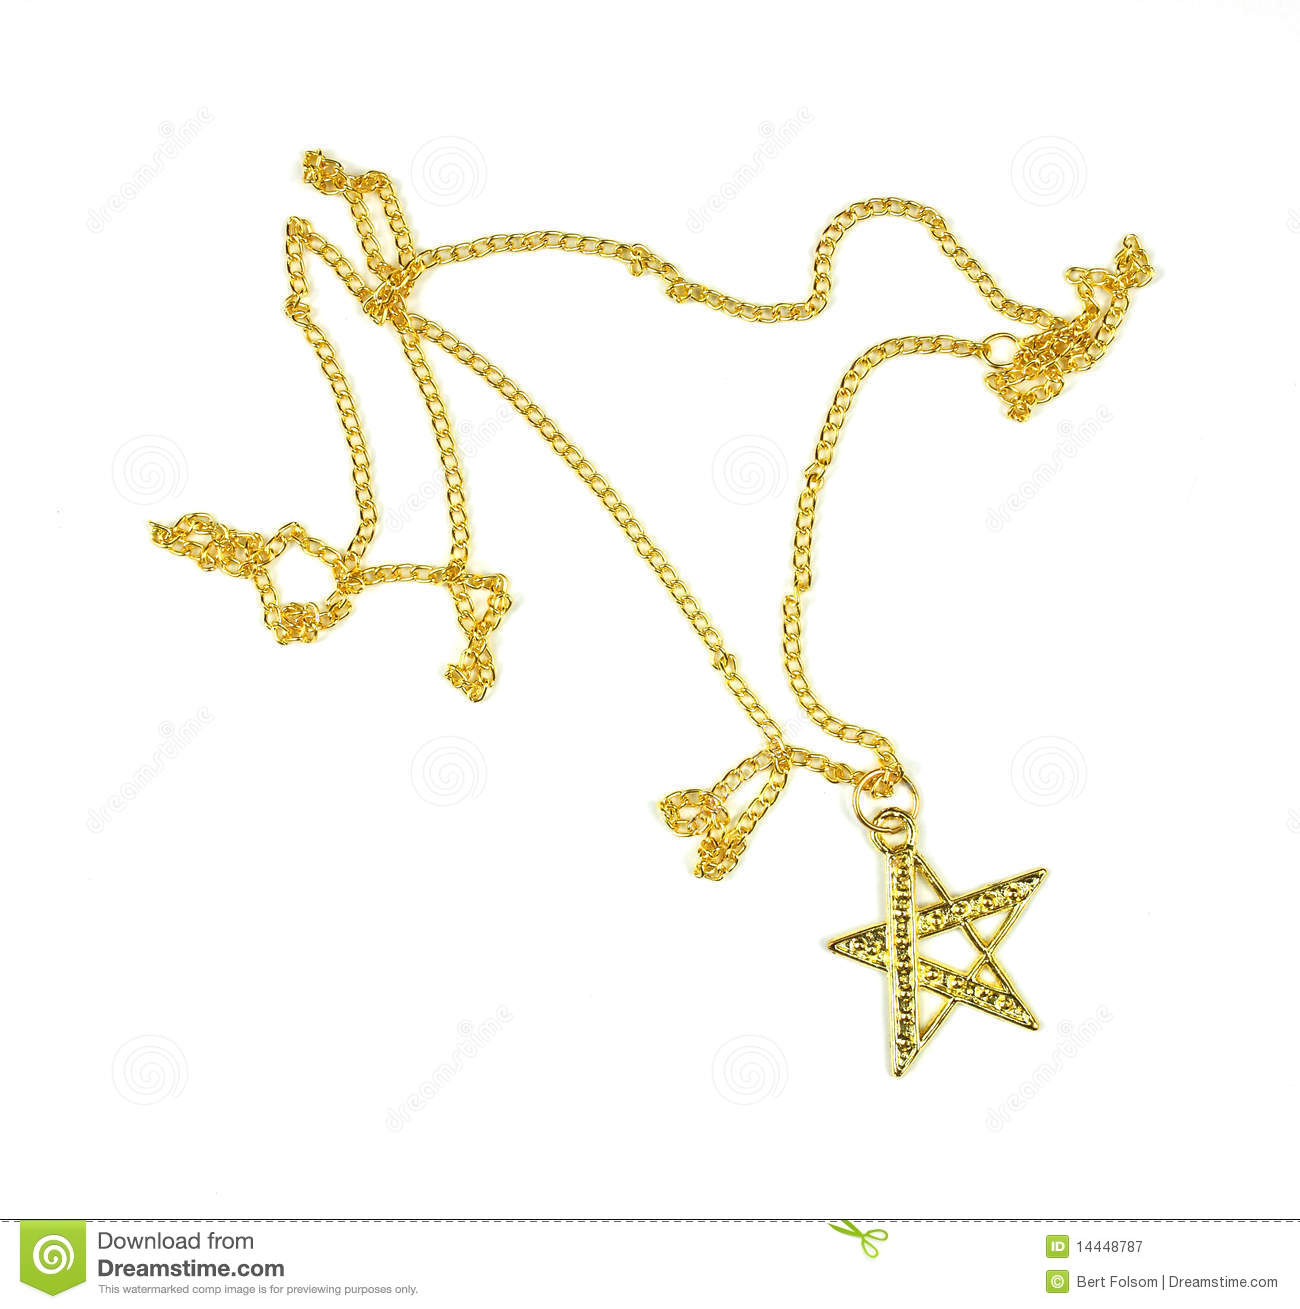 Gold Star With Chain Costume Jewelry Royalty Free Stock Photography